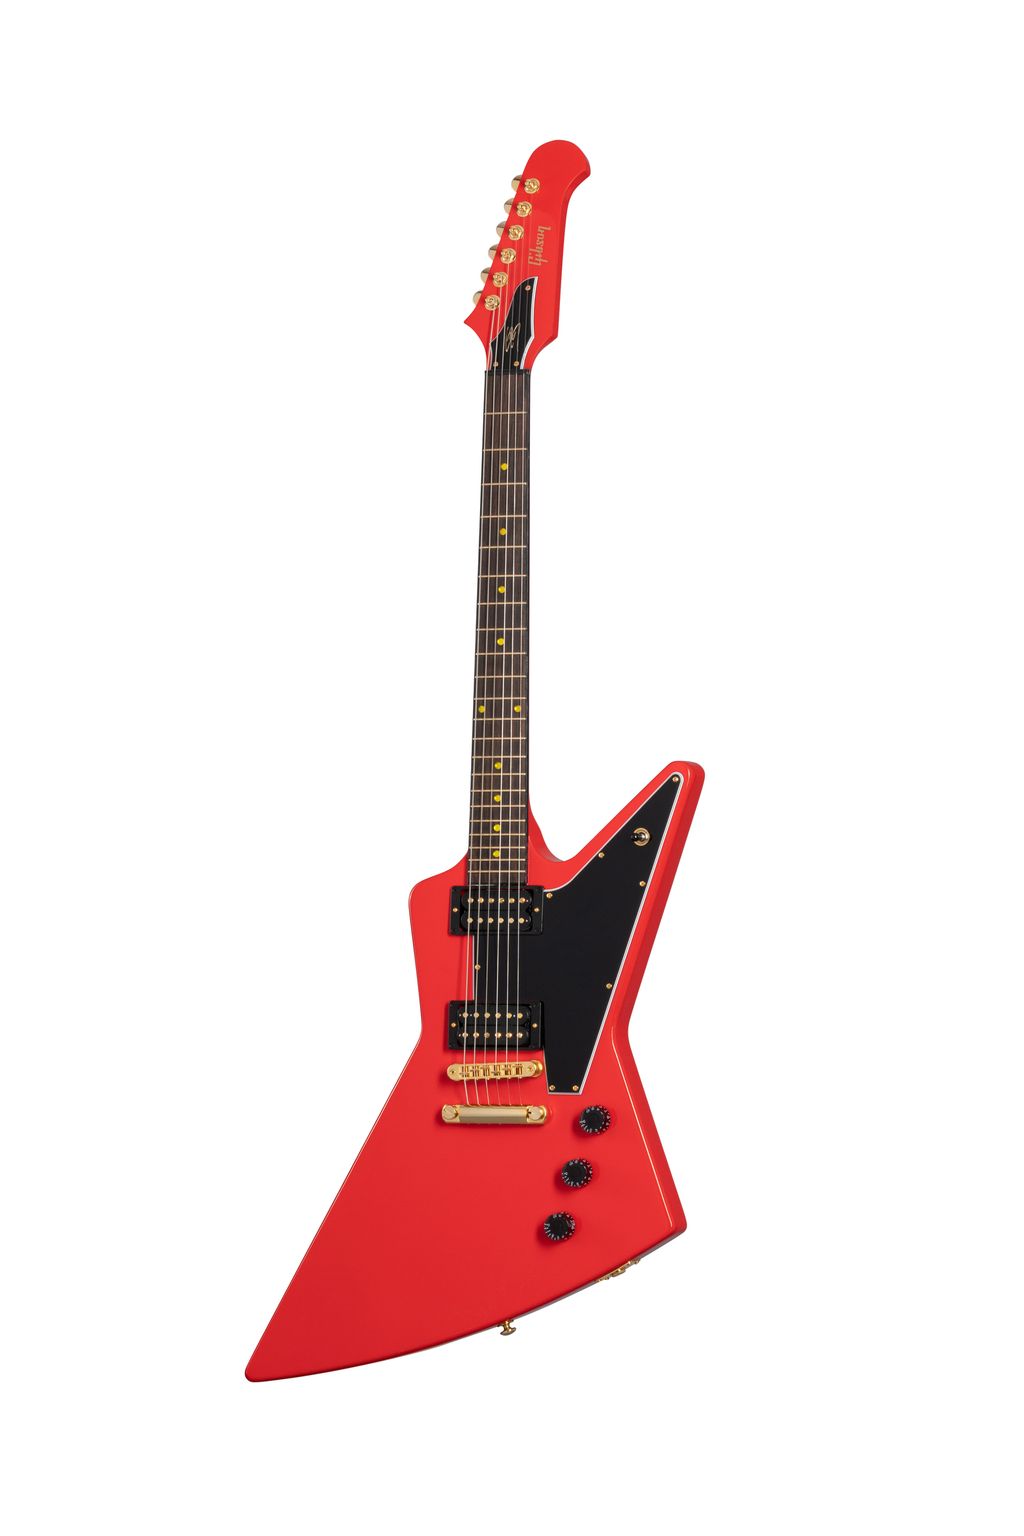 __static.gibson.com_product-images_USA_USALW586_Cardinal_Red_DSXLZ00C9GH1_front